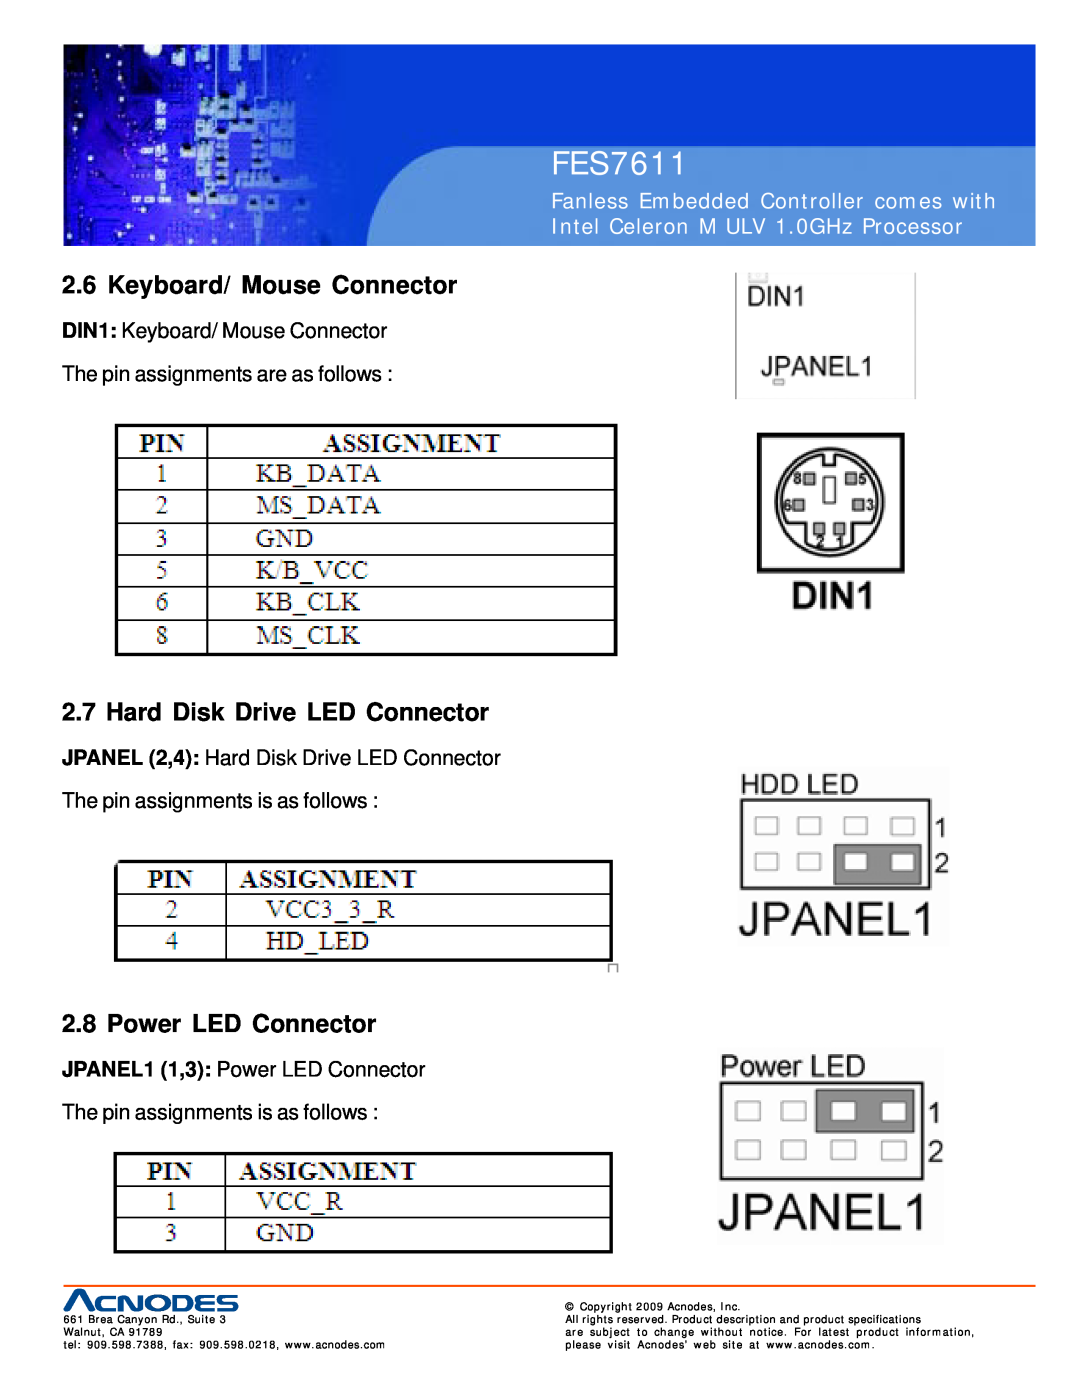 Acnodes FES7611 user manual Keyboard/ Mouse Connector, Hard Disk Drive LED Connector, Power LED Connector 